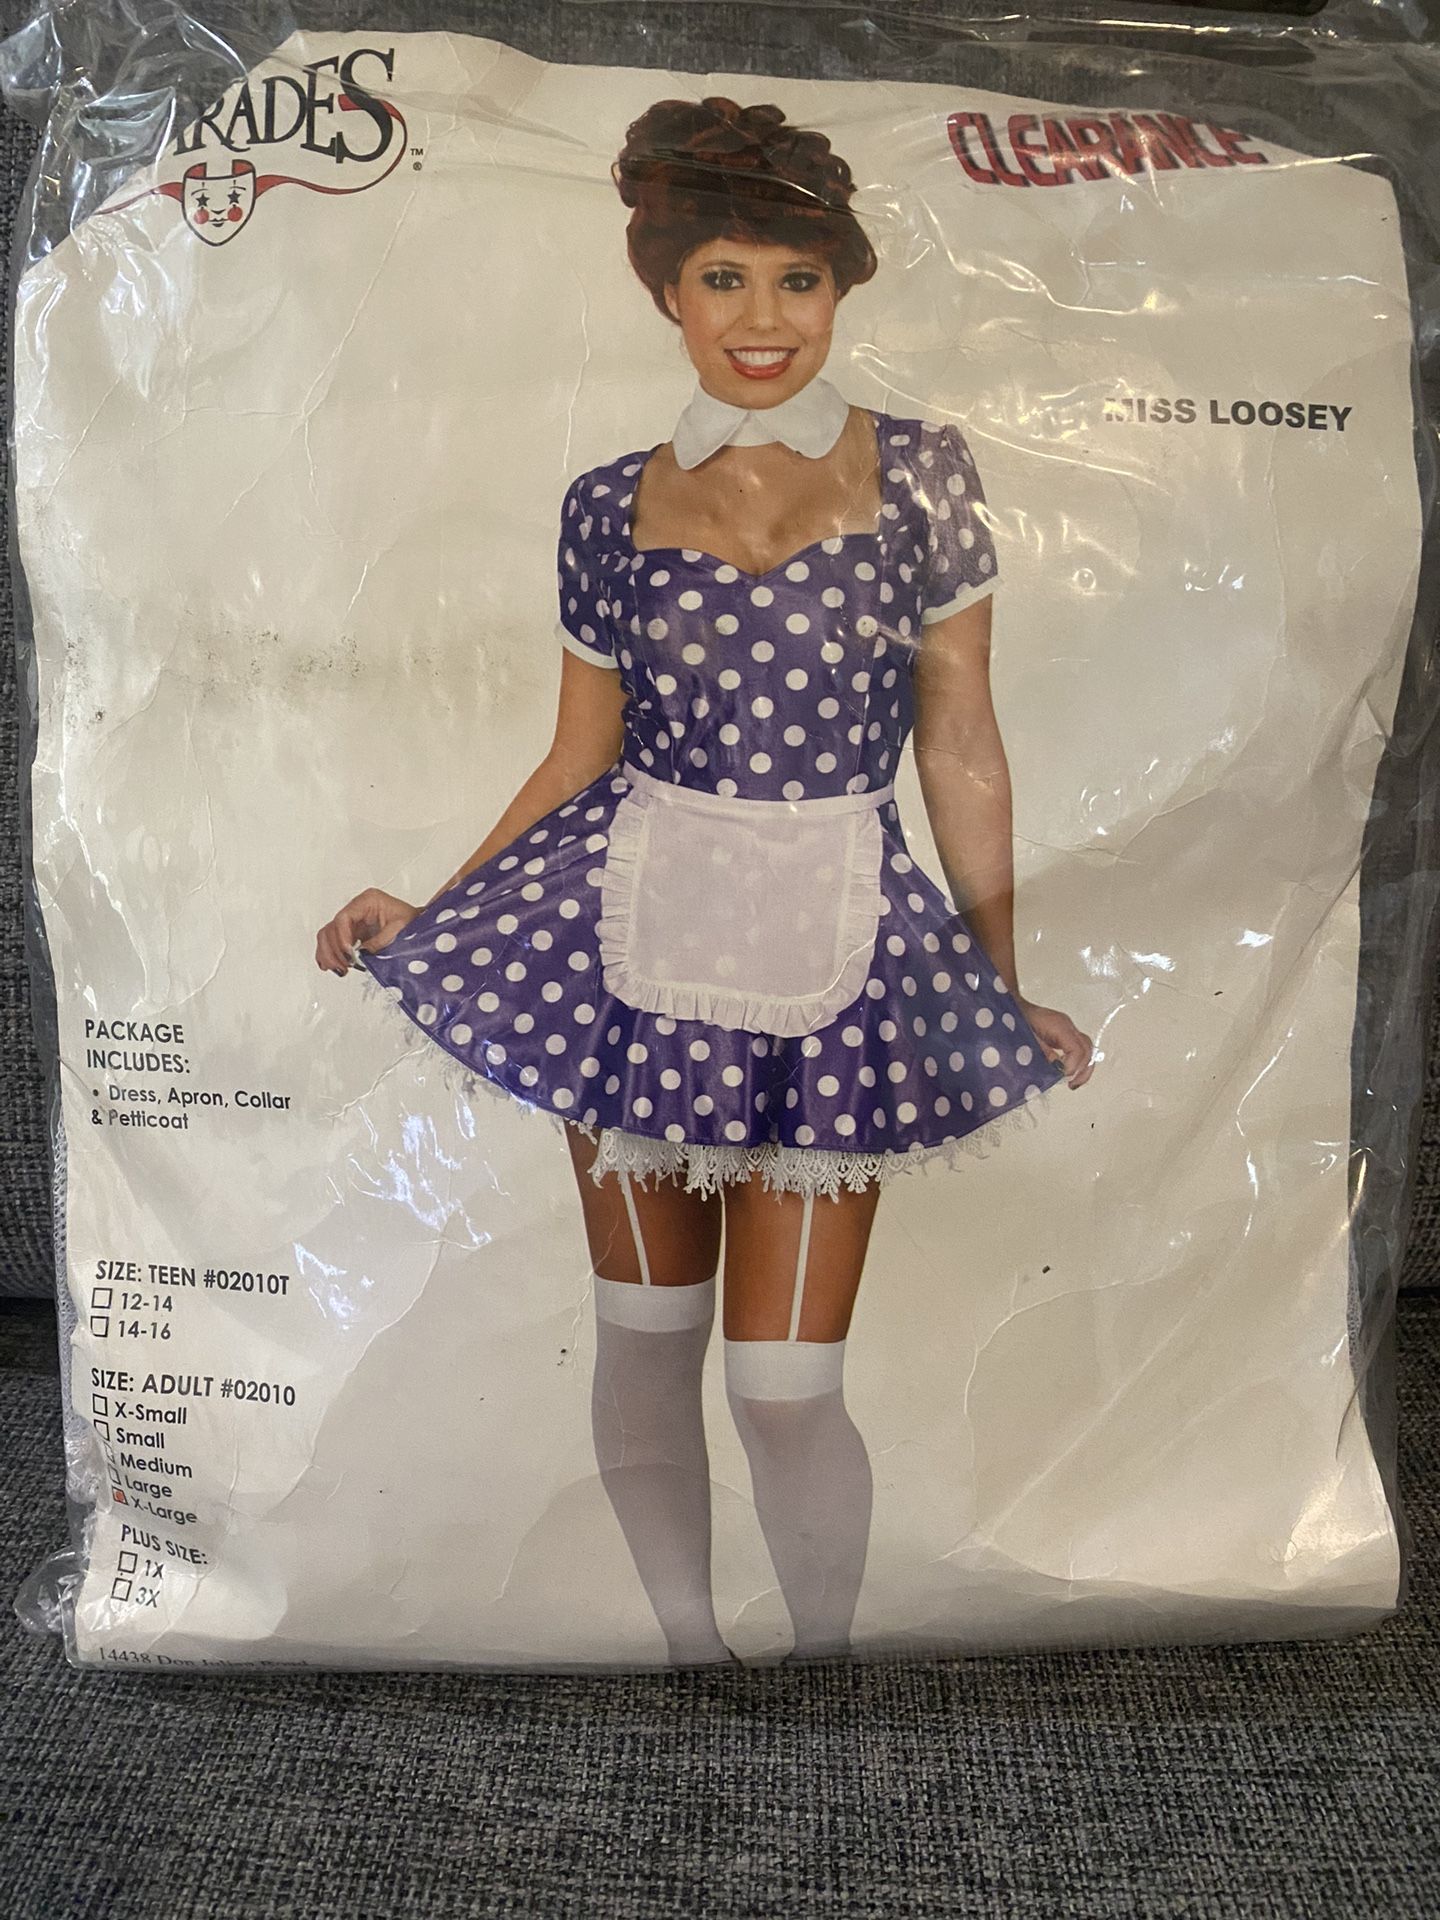 “Miss Loosy” Lucille Ball Parody Costume